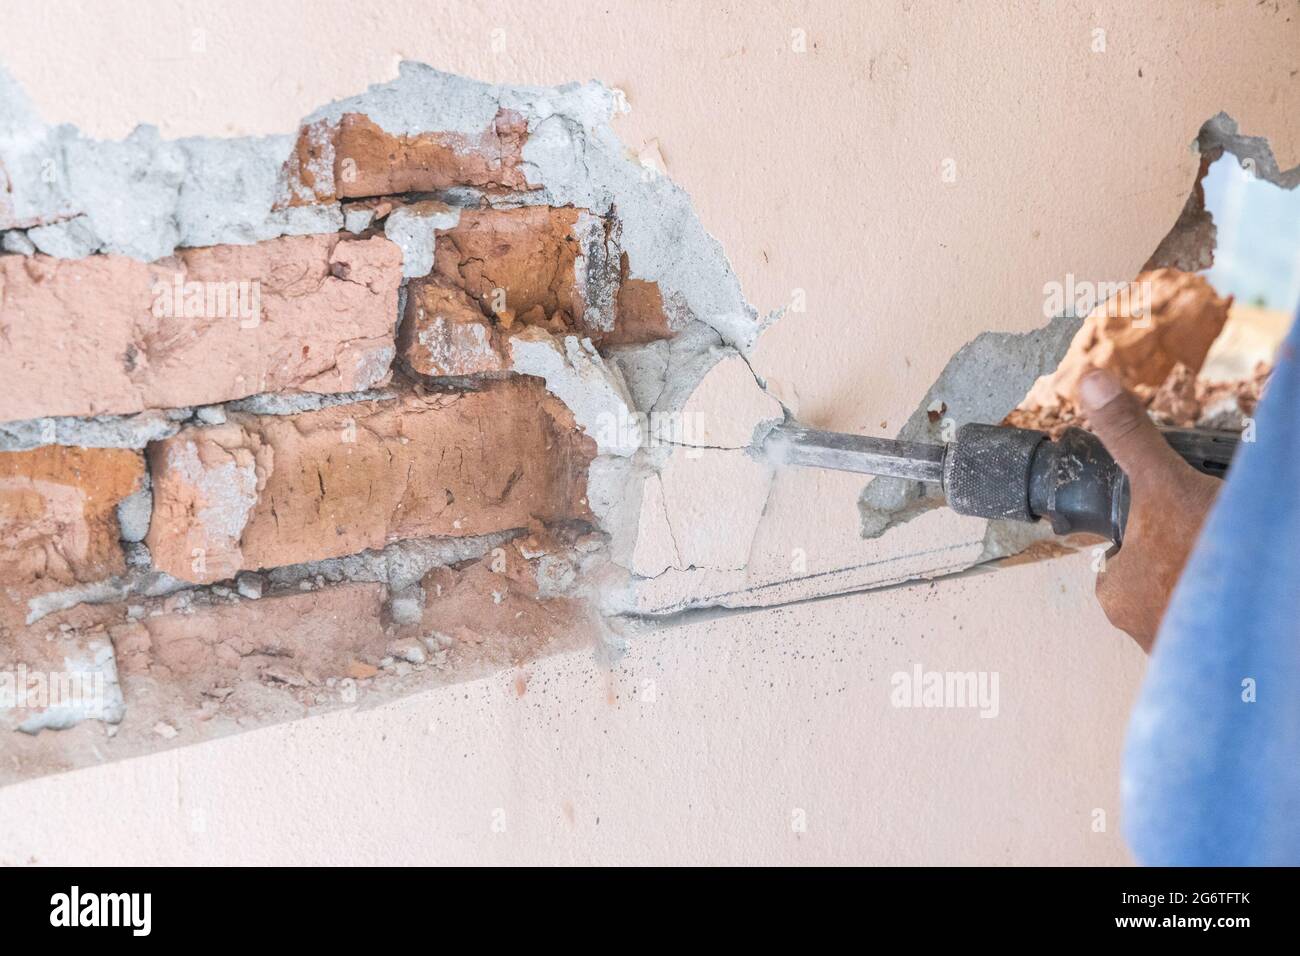 Worker use demolition hammer drill to break up wall surface. Motion blur intended. Stock Photo